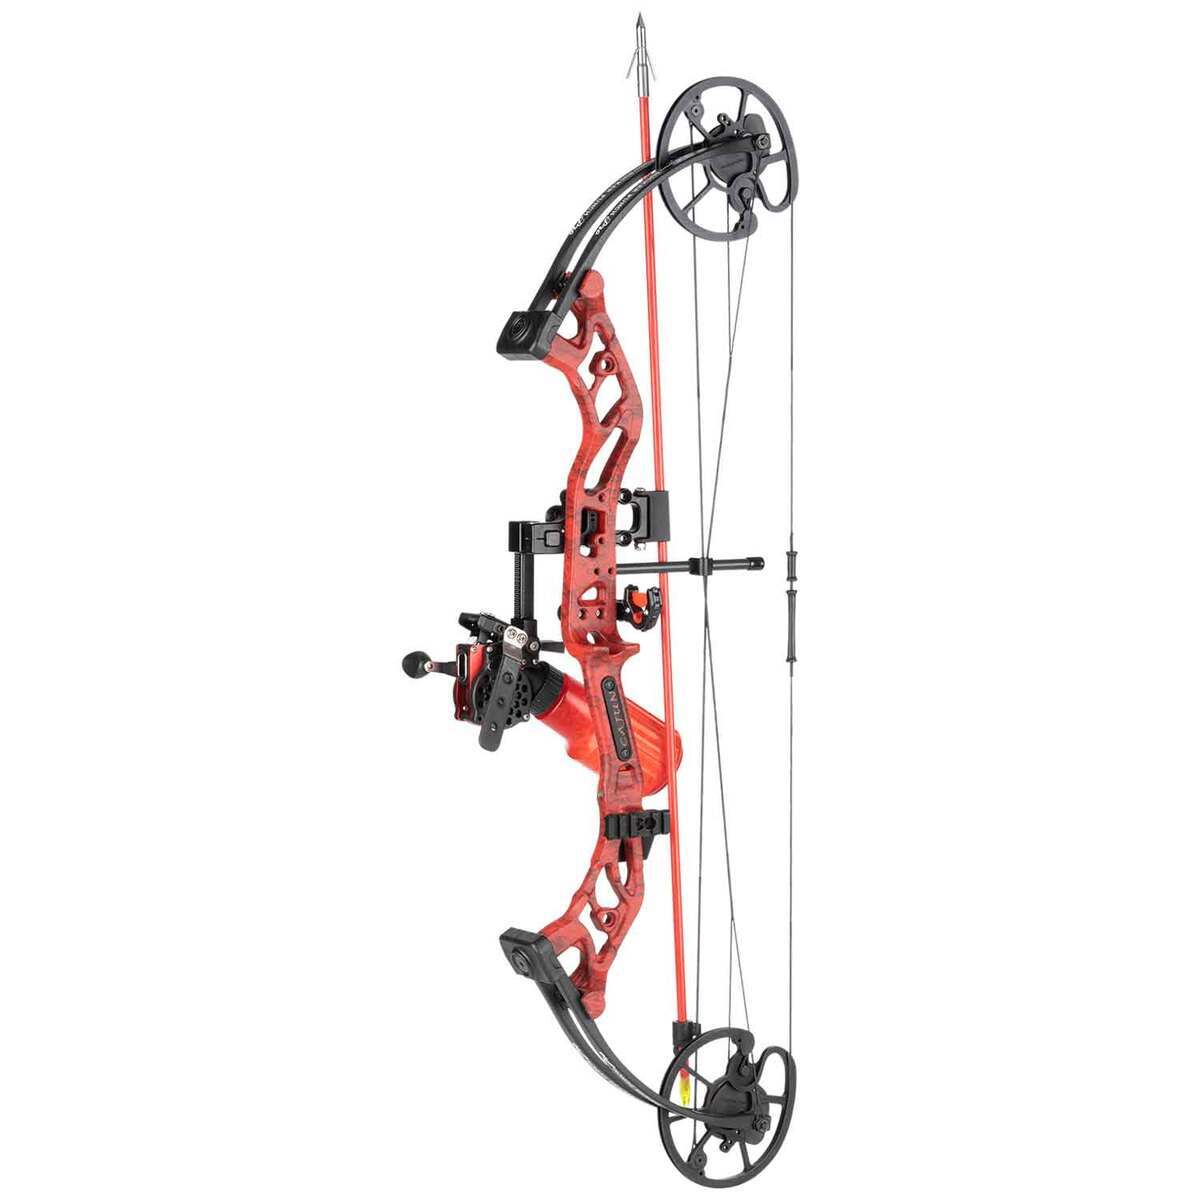 Cajun Bowfishing Sucker Punch Pro 20-50lbs Left Hand Red Compound